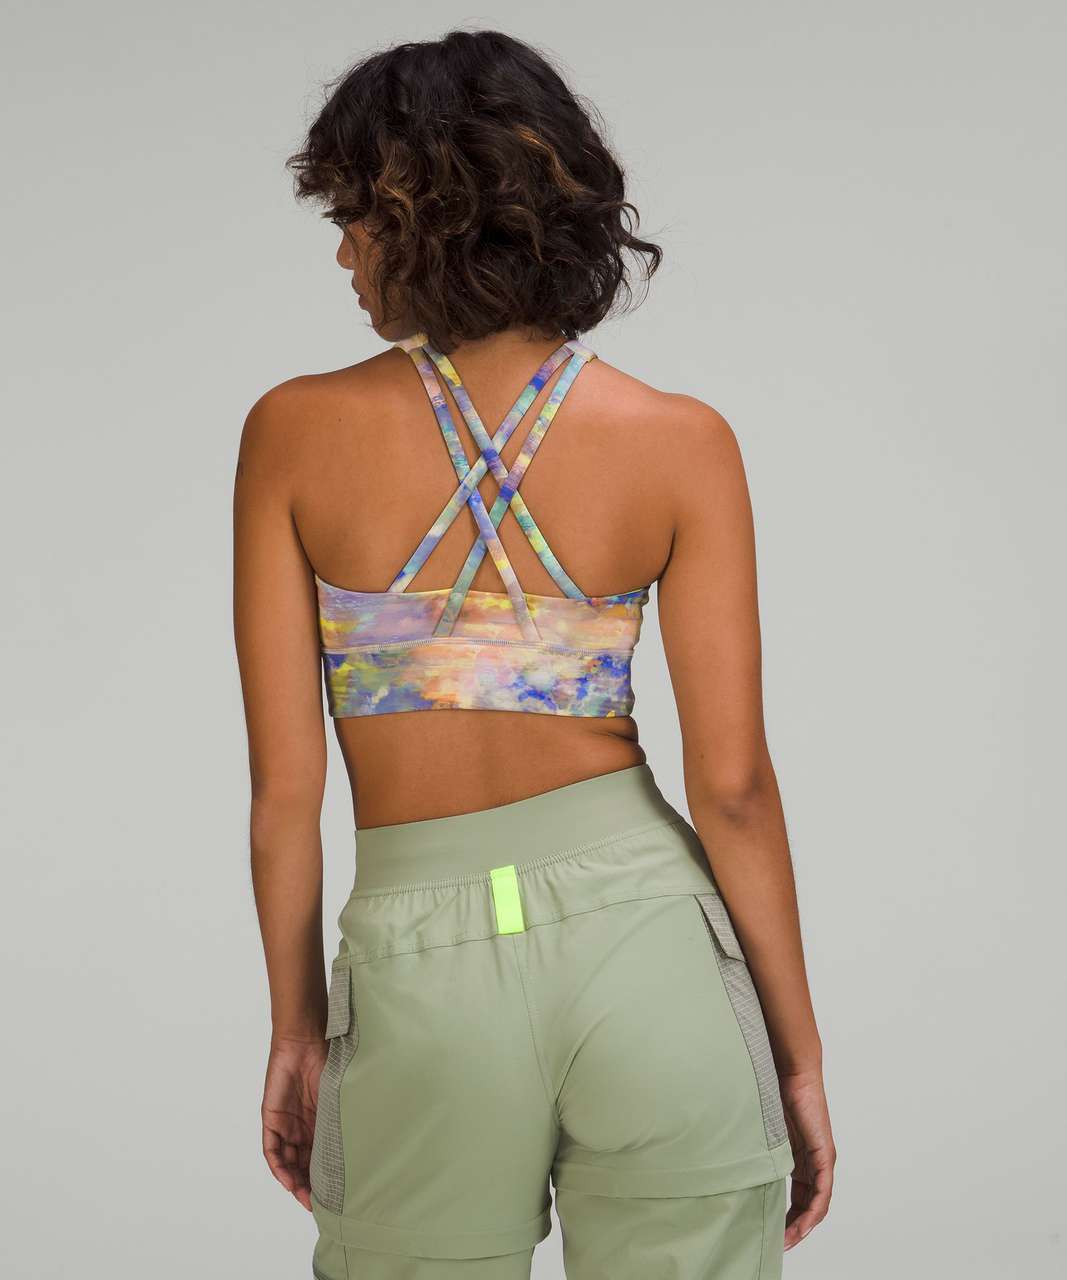 The energy bra high neck finally made it👏 Paired with melanite aligns : r/ lululemon